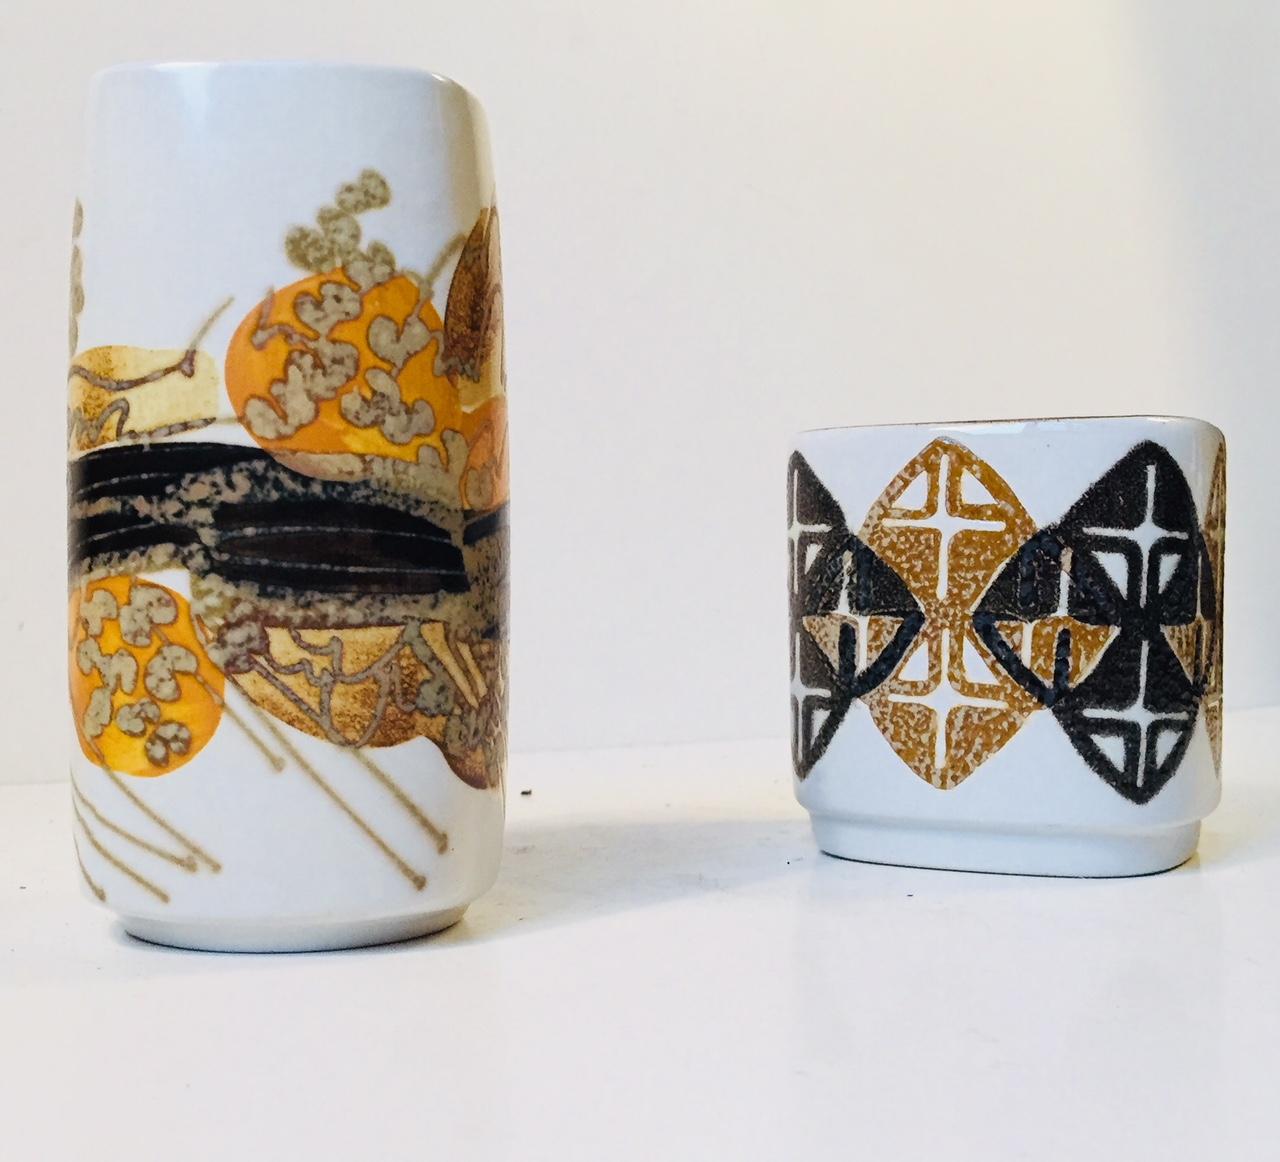 A set of faience vases with abstract - modernistic decor in contrasting glazes. Both designed by the Danish ceramist Ellen Malmer (EM) and manufactured by Royal Copenhagen during the 1970s. Both are fully signed, numbered and marked to the base. The